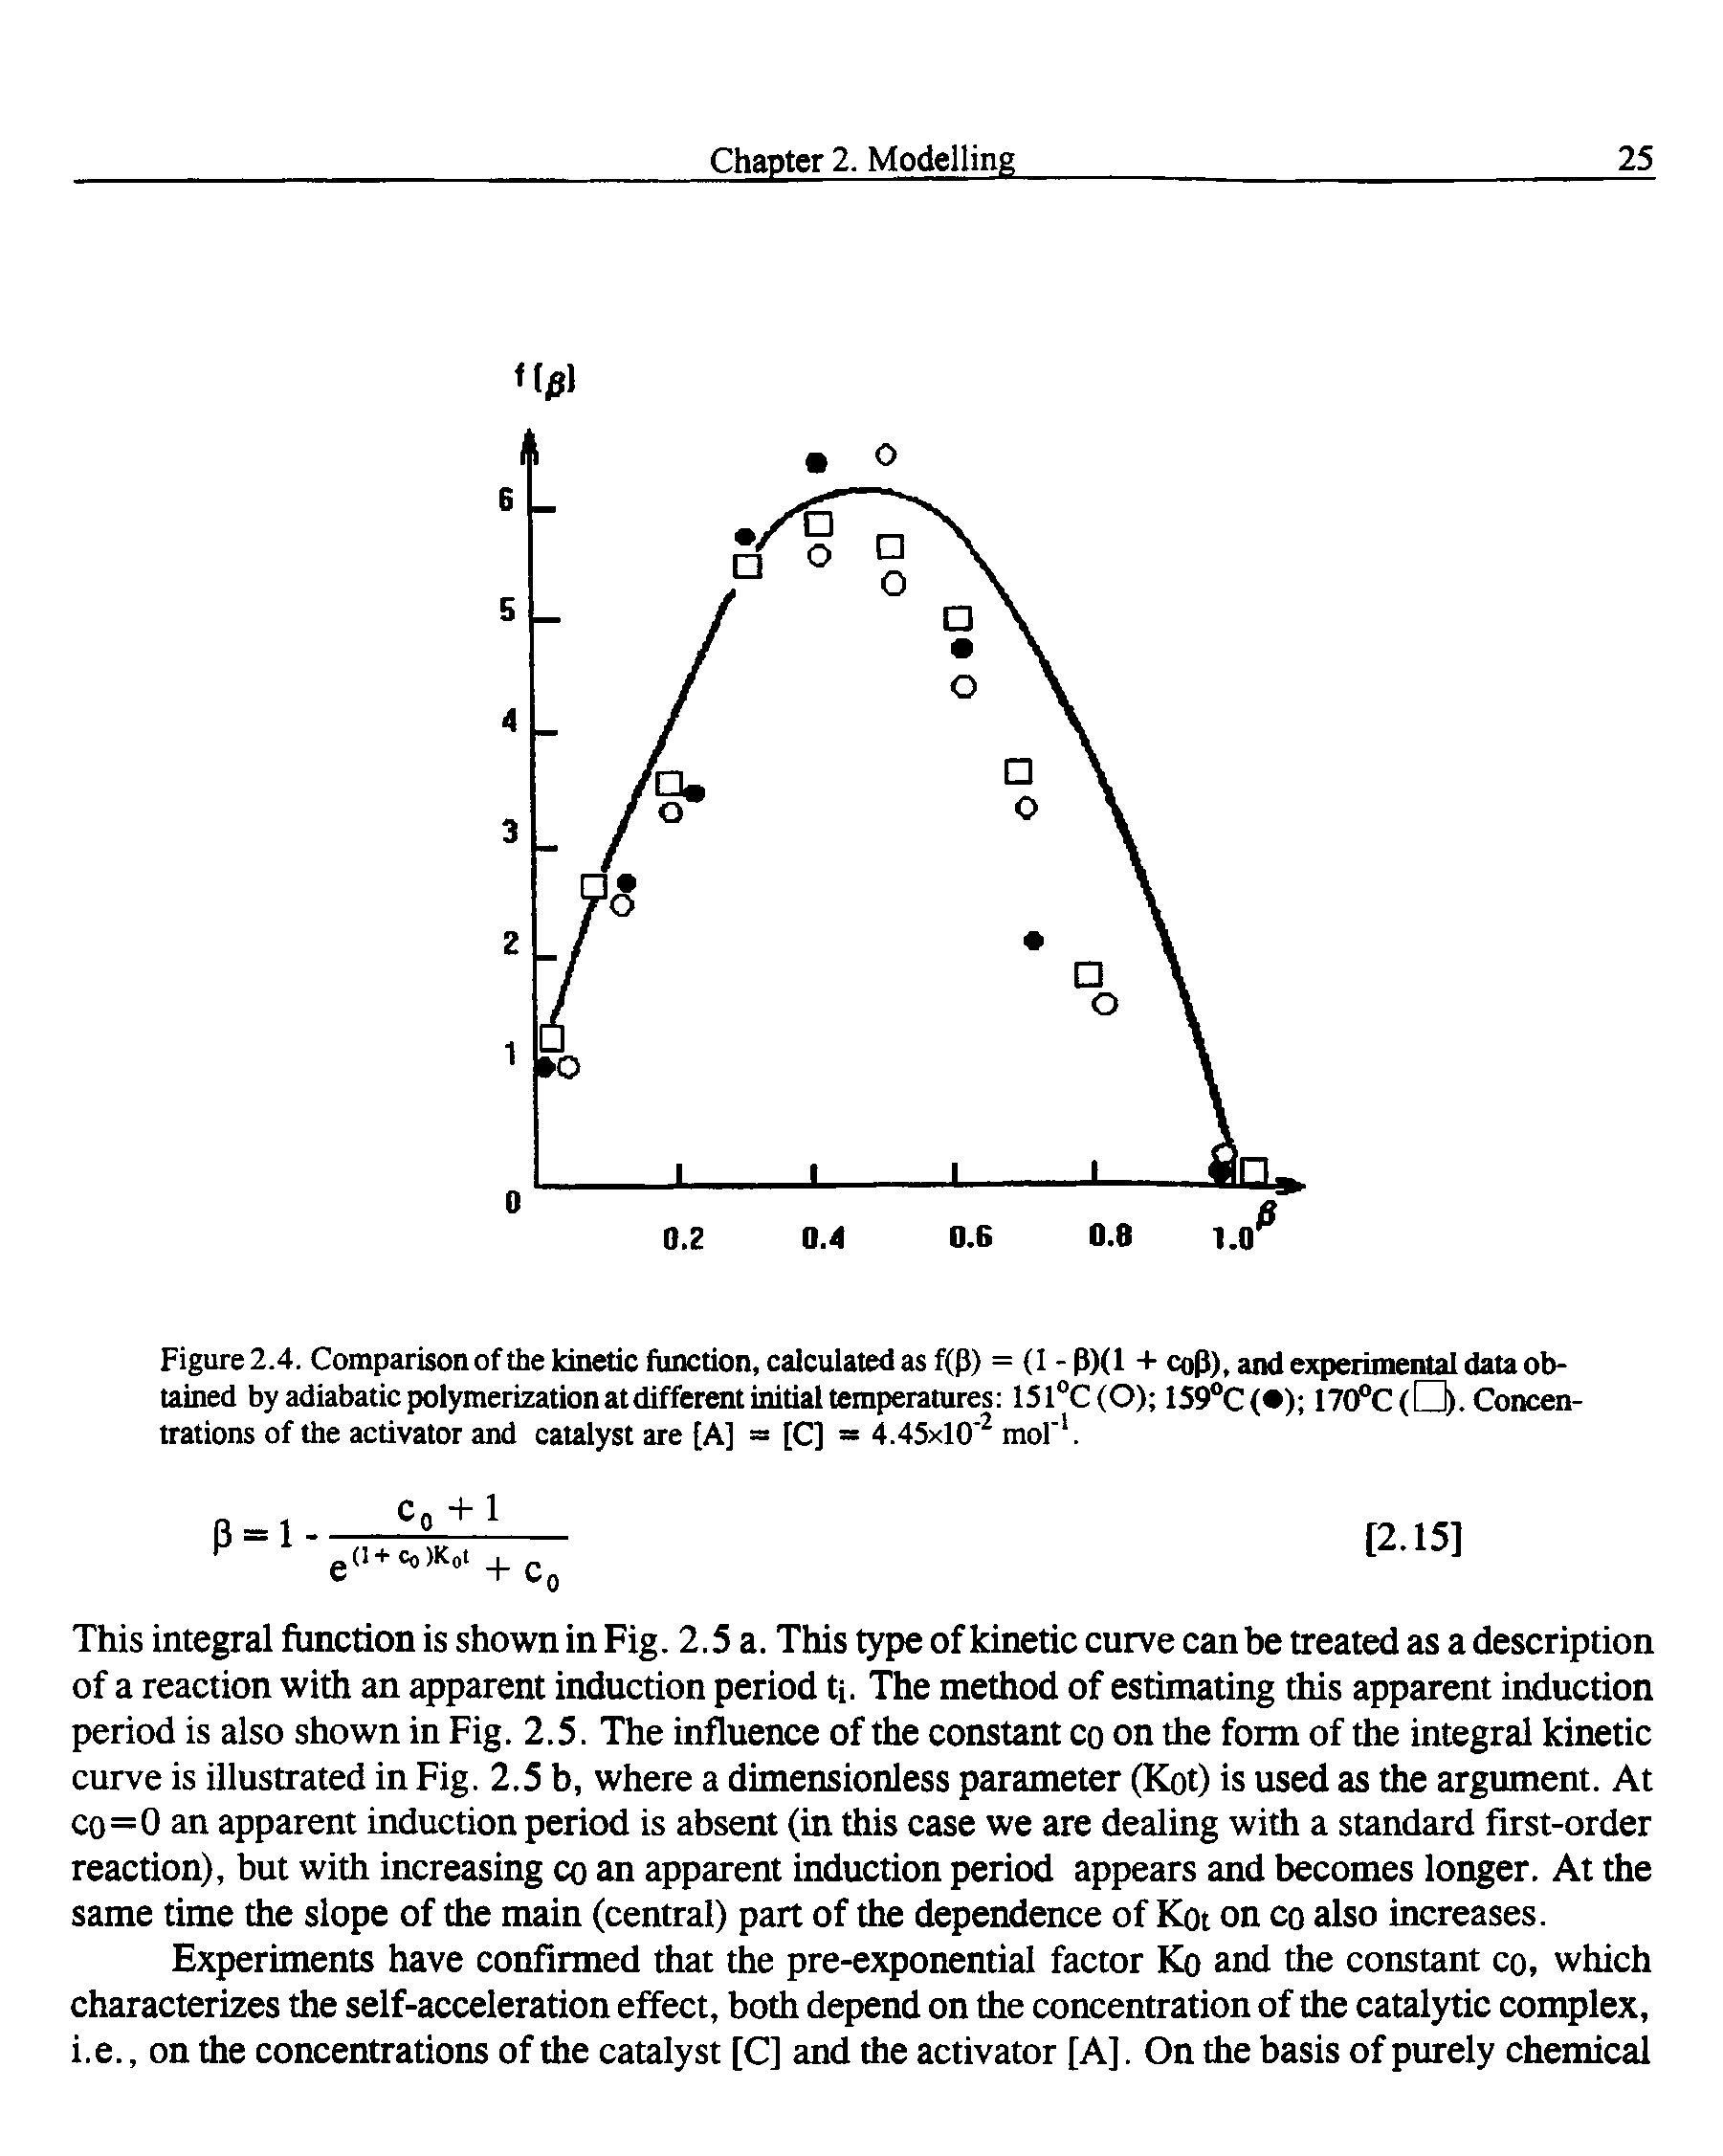 Figure 2.4. Comparison of the kinetic function, calculated as f(P) = (I -P)(l + coP), and experimental data obtained by adiabatic polymerization at different initial temperatures 1510C(O) 159°C( ) 170°C ( ). Concentrations of the activator and catalyst are [A] = [C] = 4.45xl0 2 mol 1.